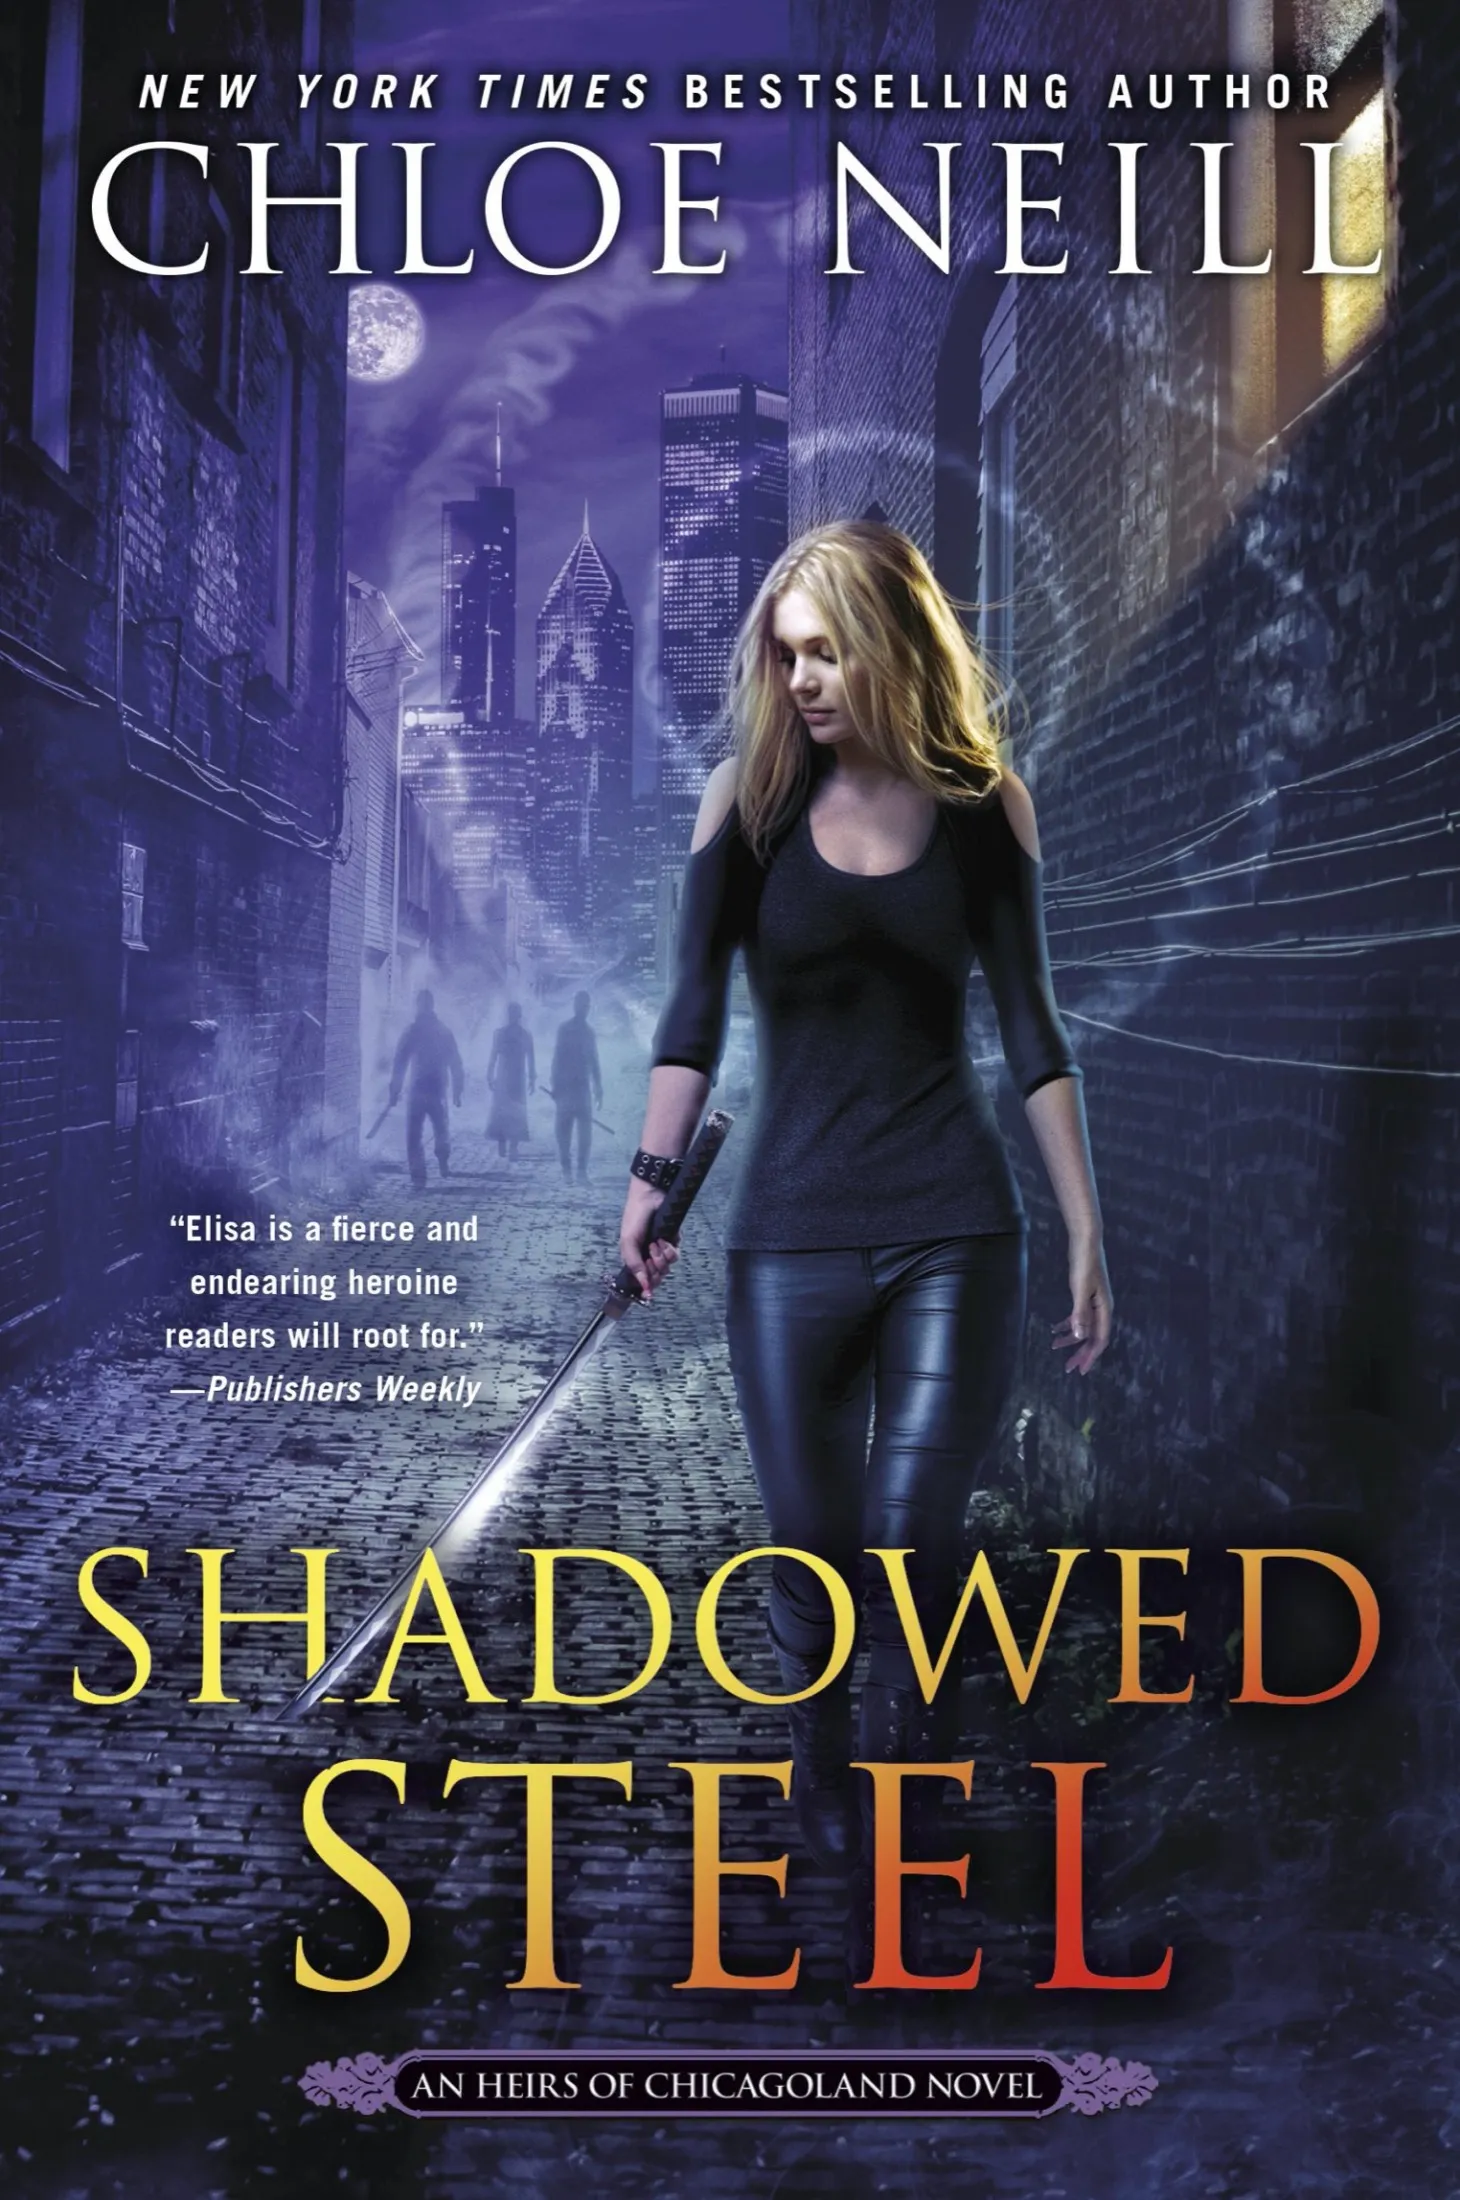 Shadowed Steel (An Heirs of Chicagoland #3)